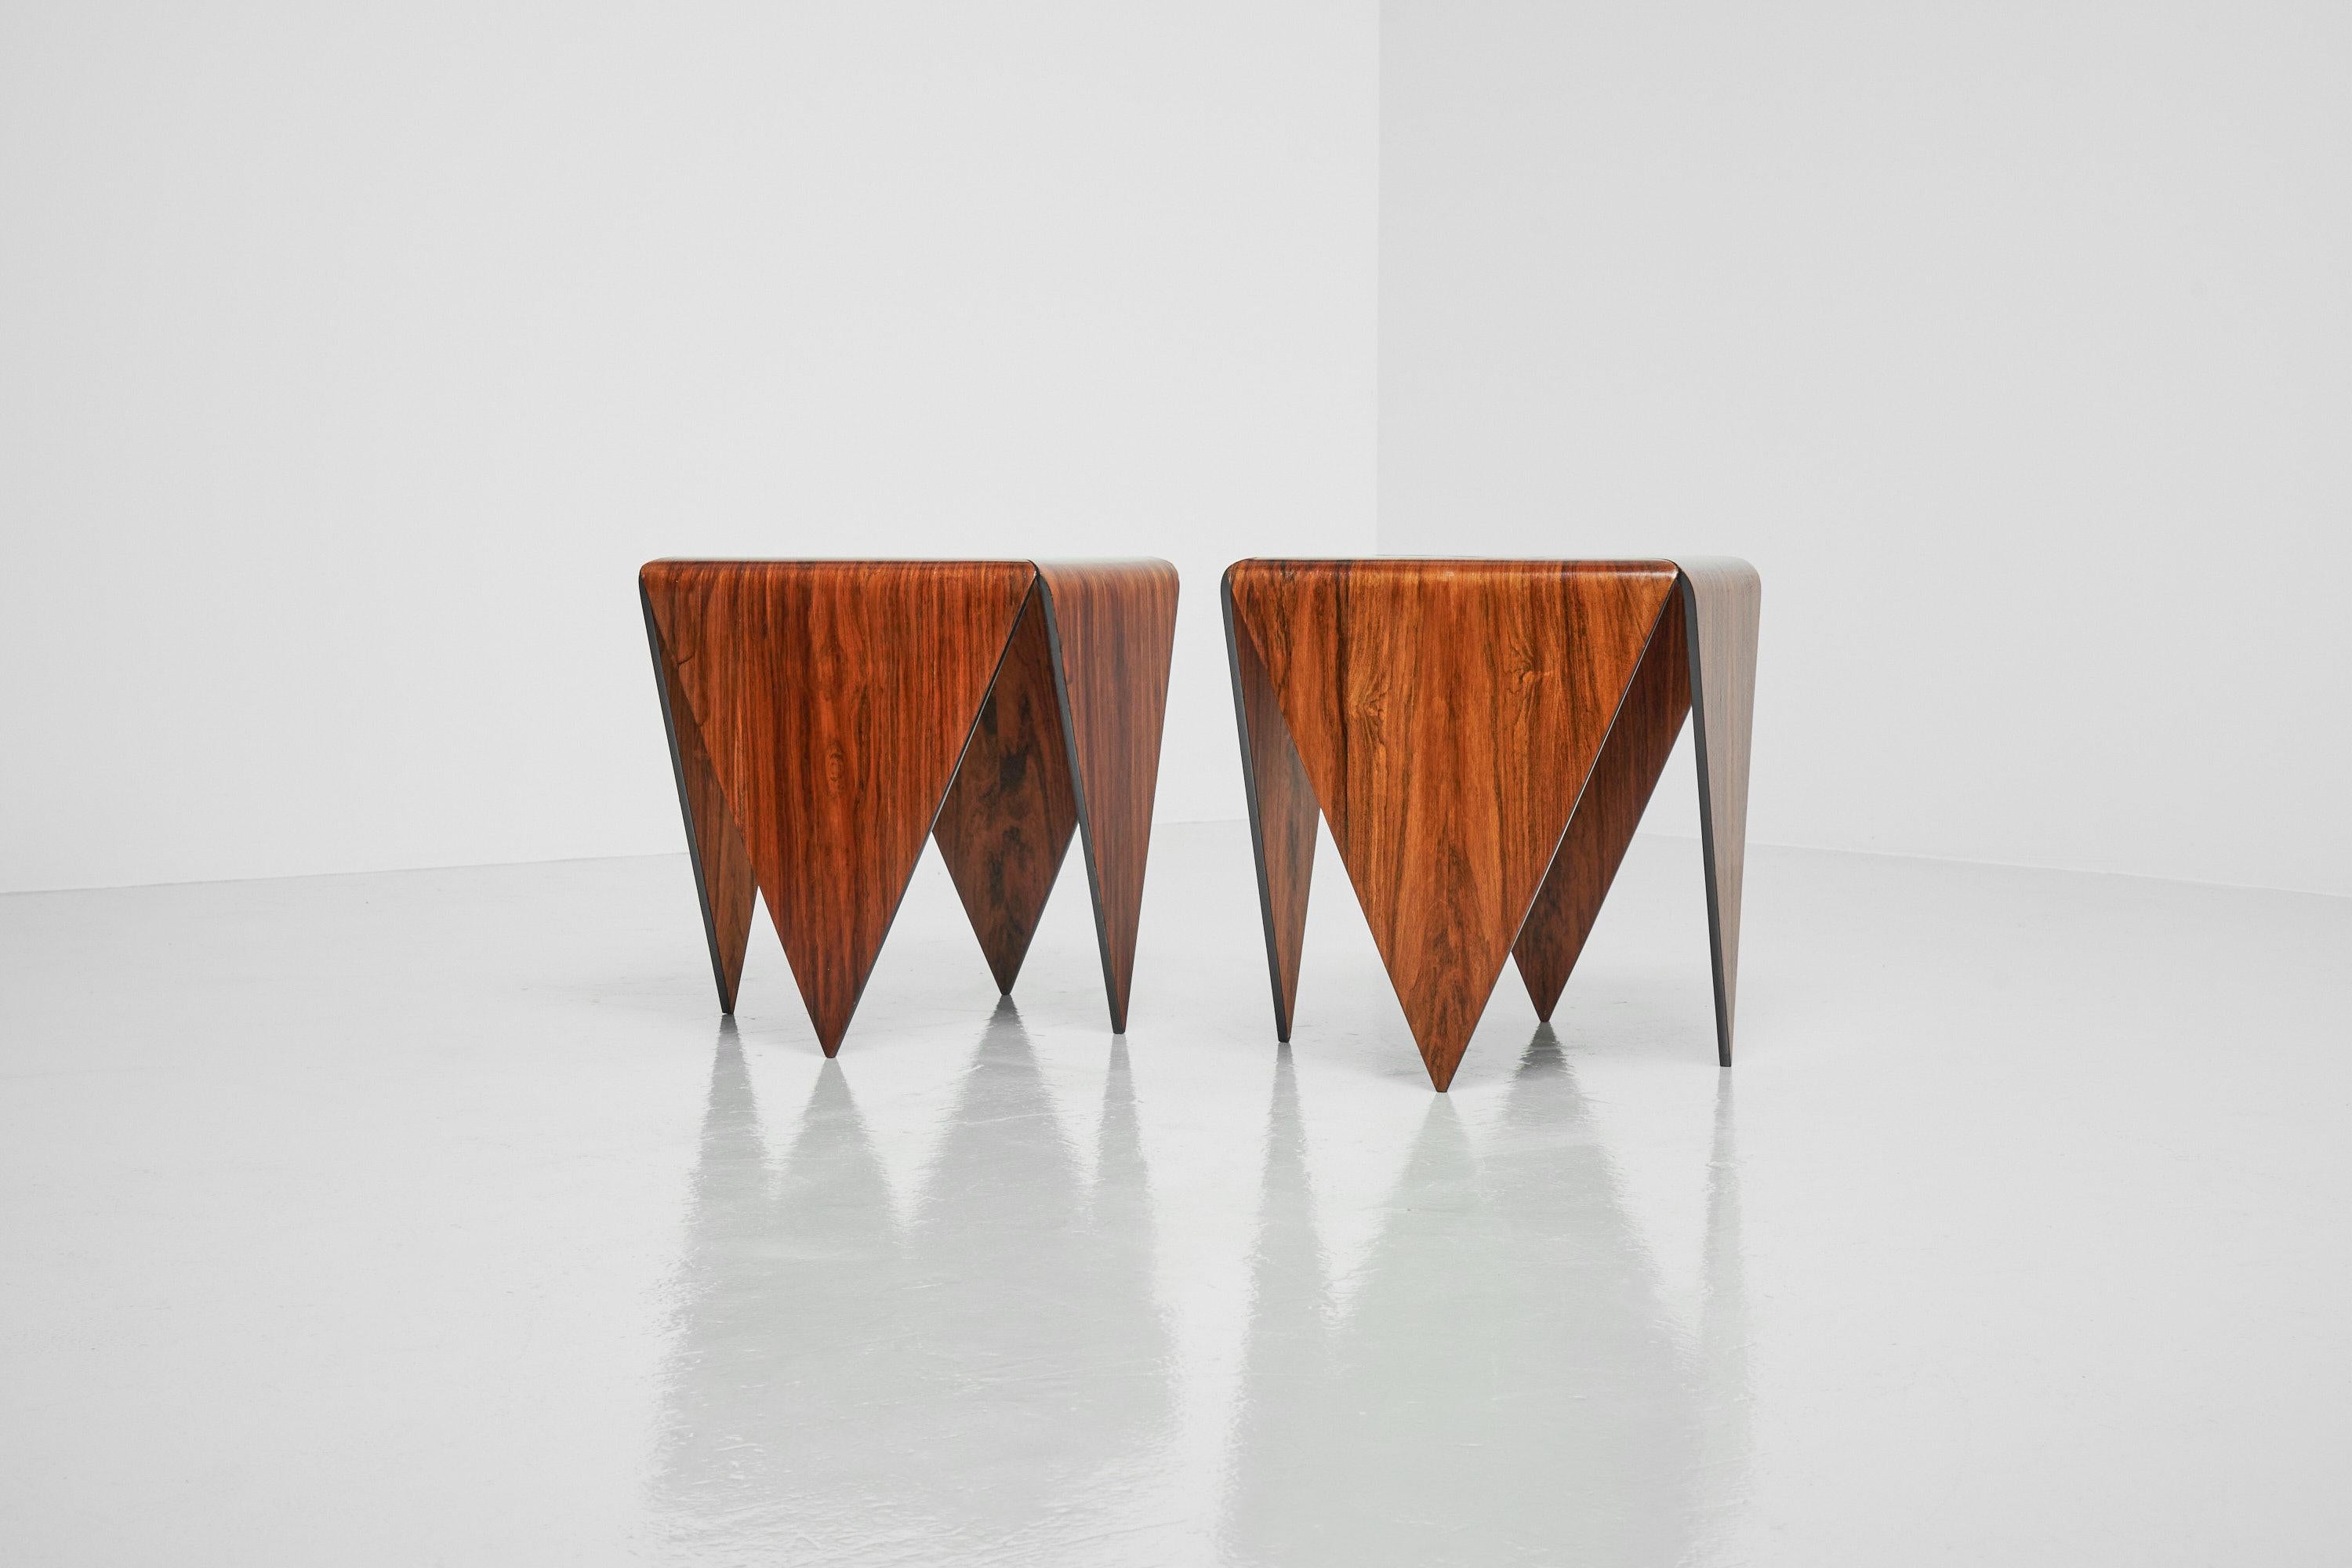 Stunning and rare pair of so-called 'Petalas' side tables designed by Jorge Zalszupin and manufactured in his own company L’Atelier, Brazil 1959. The Pétalas series was created in order to make the best possible use of the wood used during